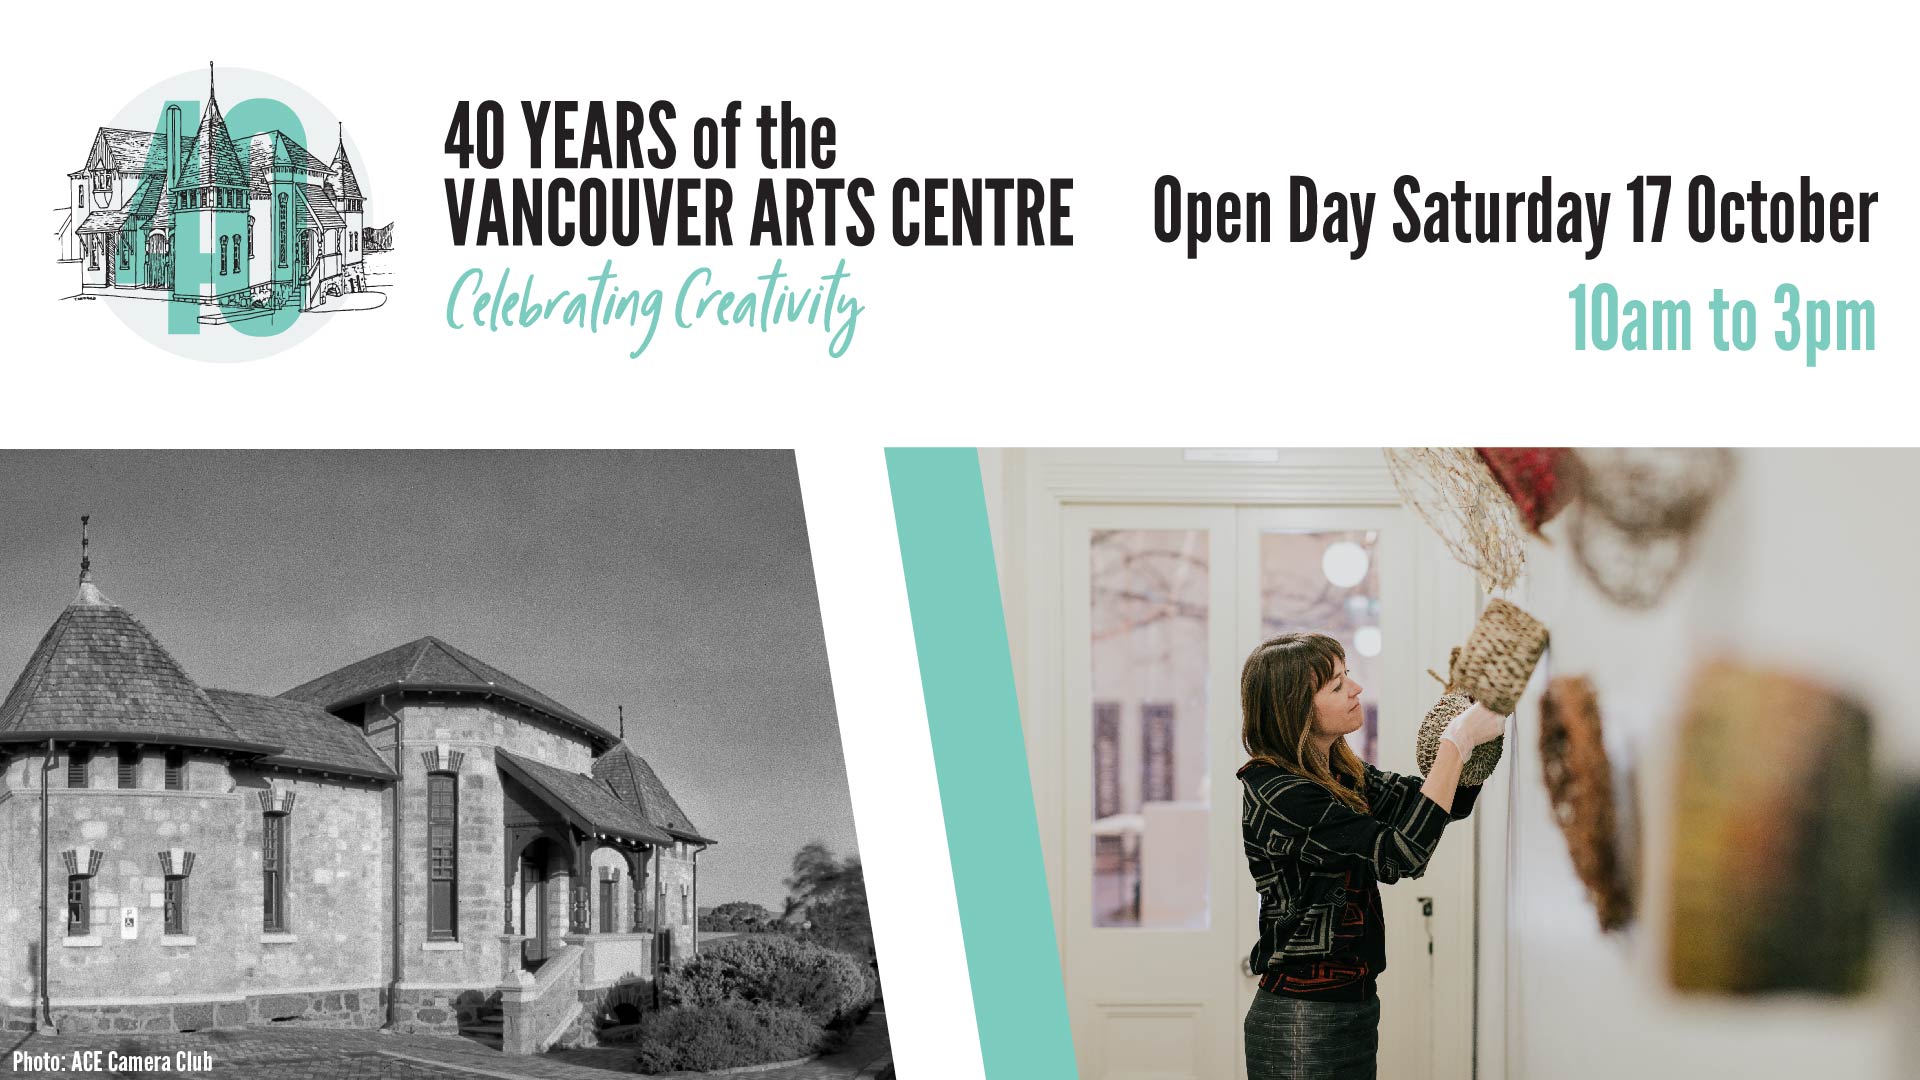 Vancouver Arts Centre Celebrating 40 Years